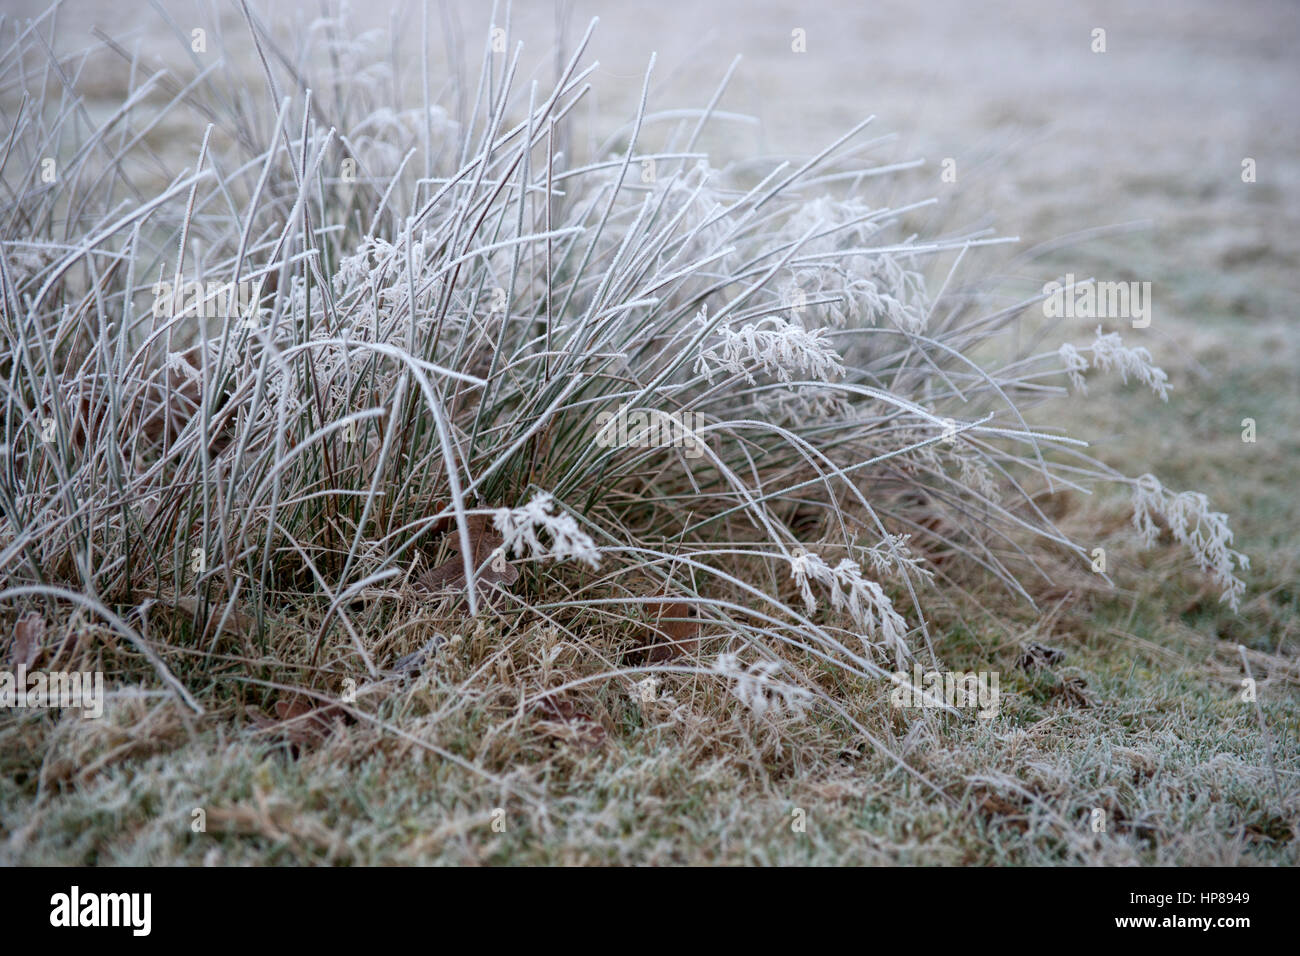 Reeds and grasses in hoar frost on a winter morning Stock Photo